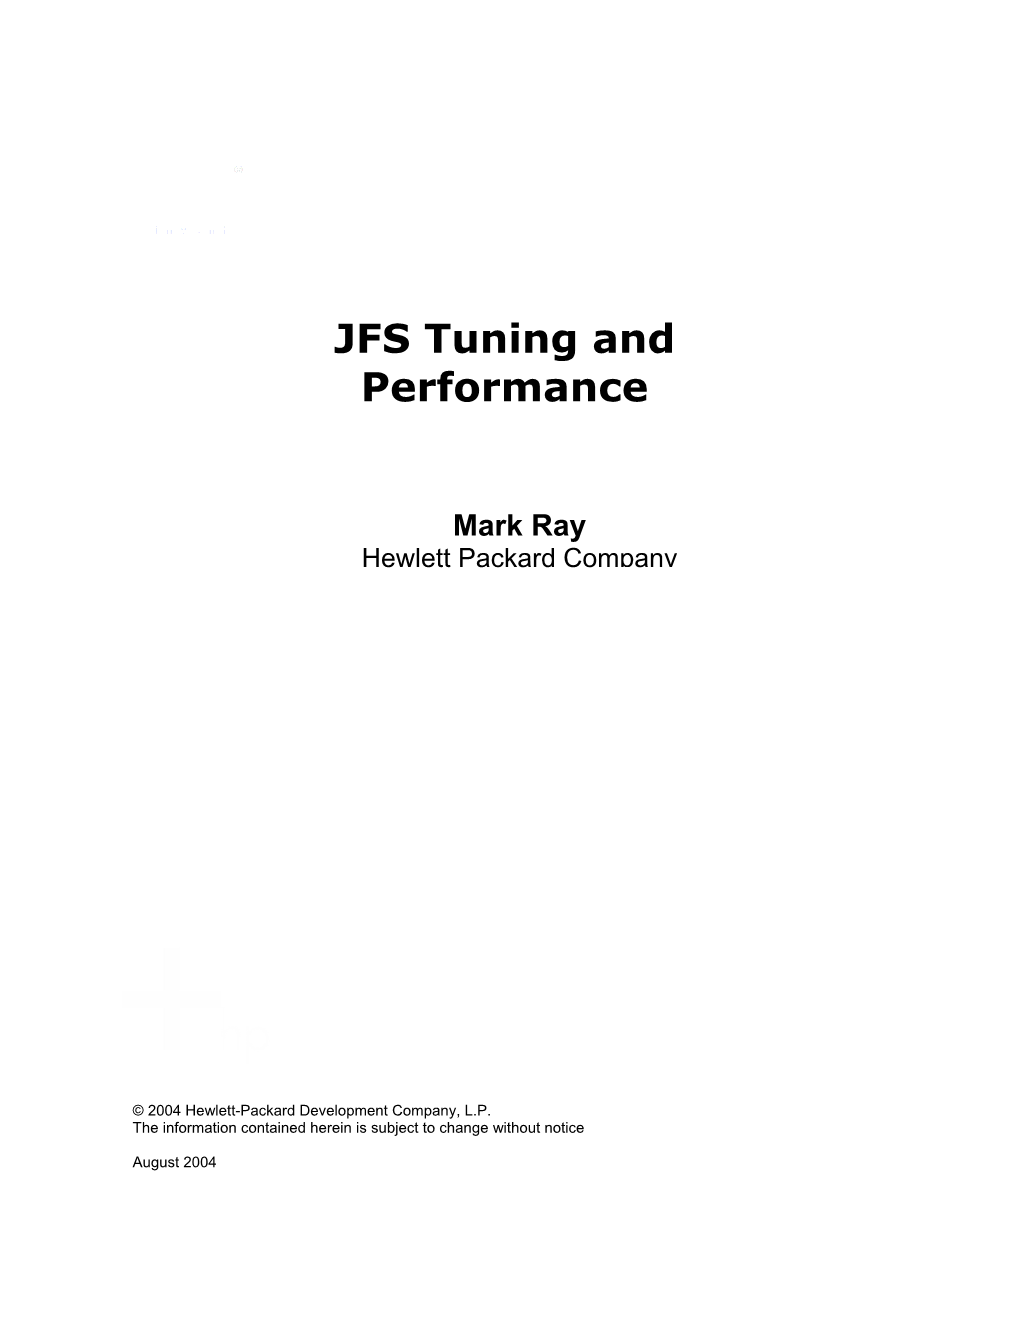 JFS Tuning and Performance